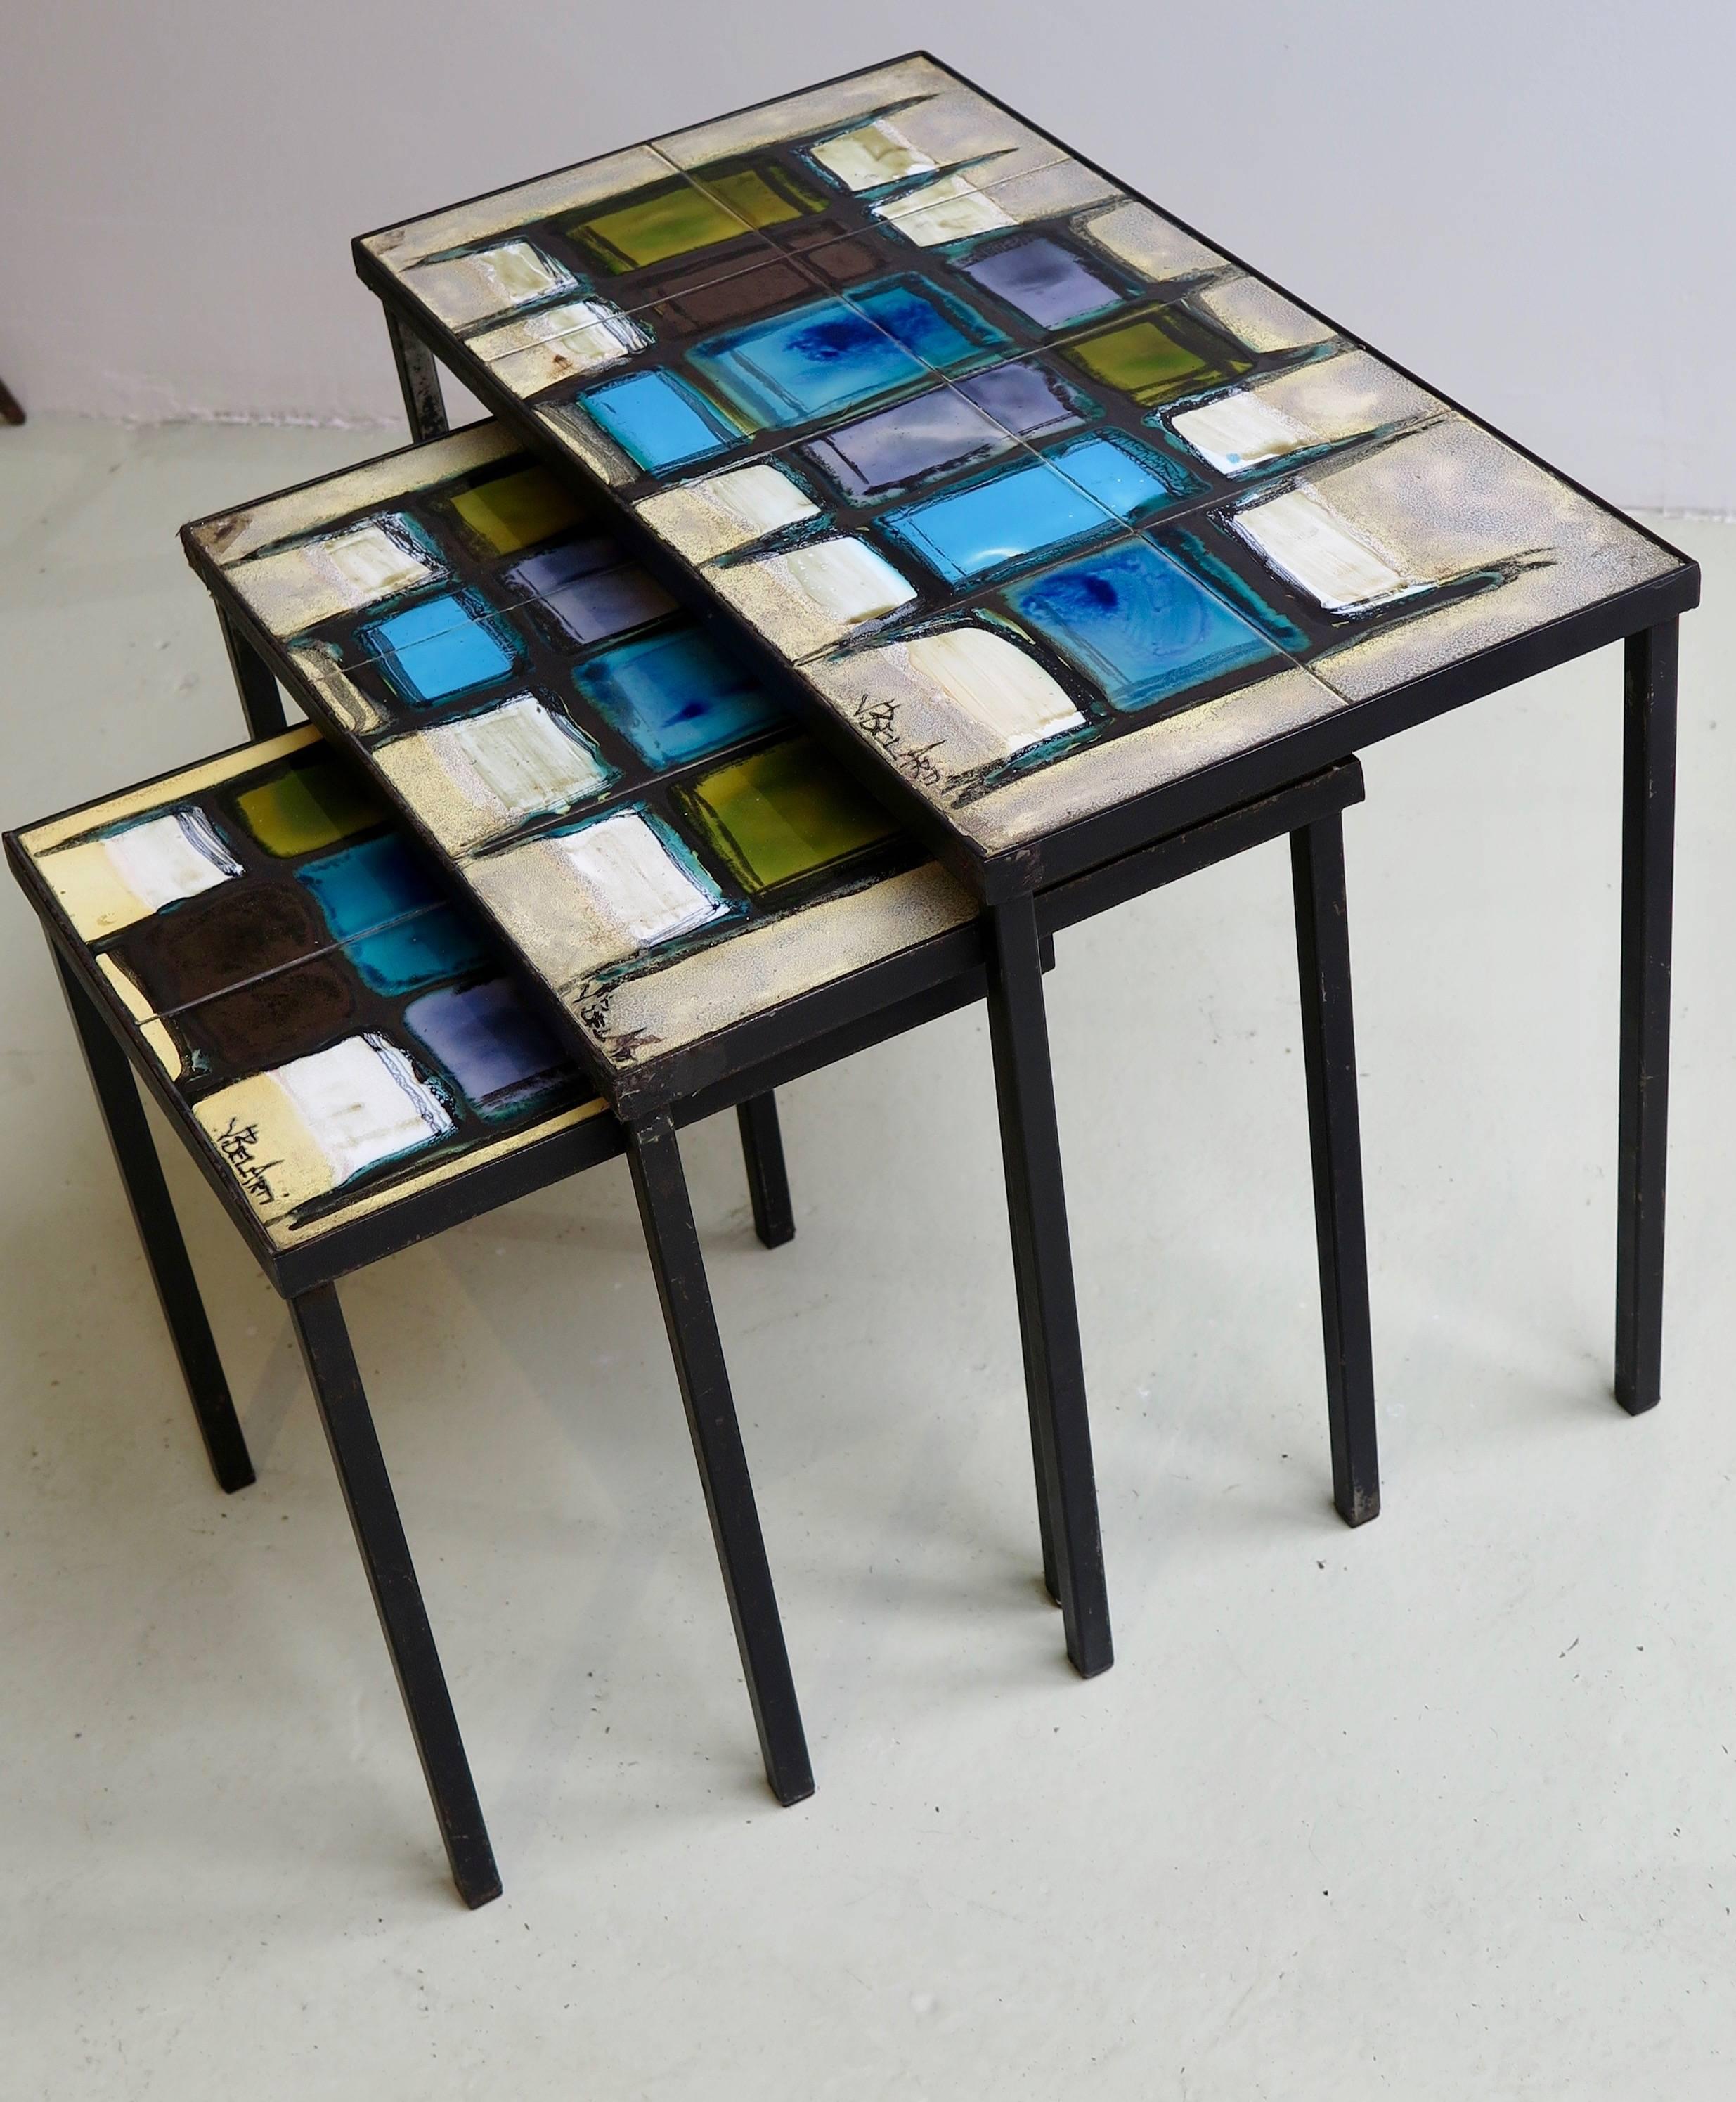 Nest of three tables with hand-painted ceramic tiles on black metal base frame by Belarti, Belgium, circa 1960. Signed.